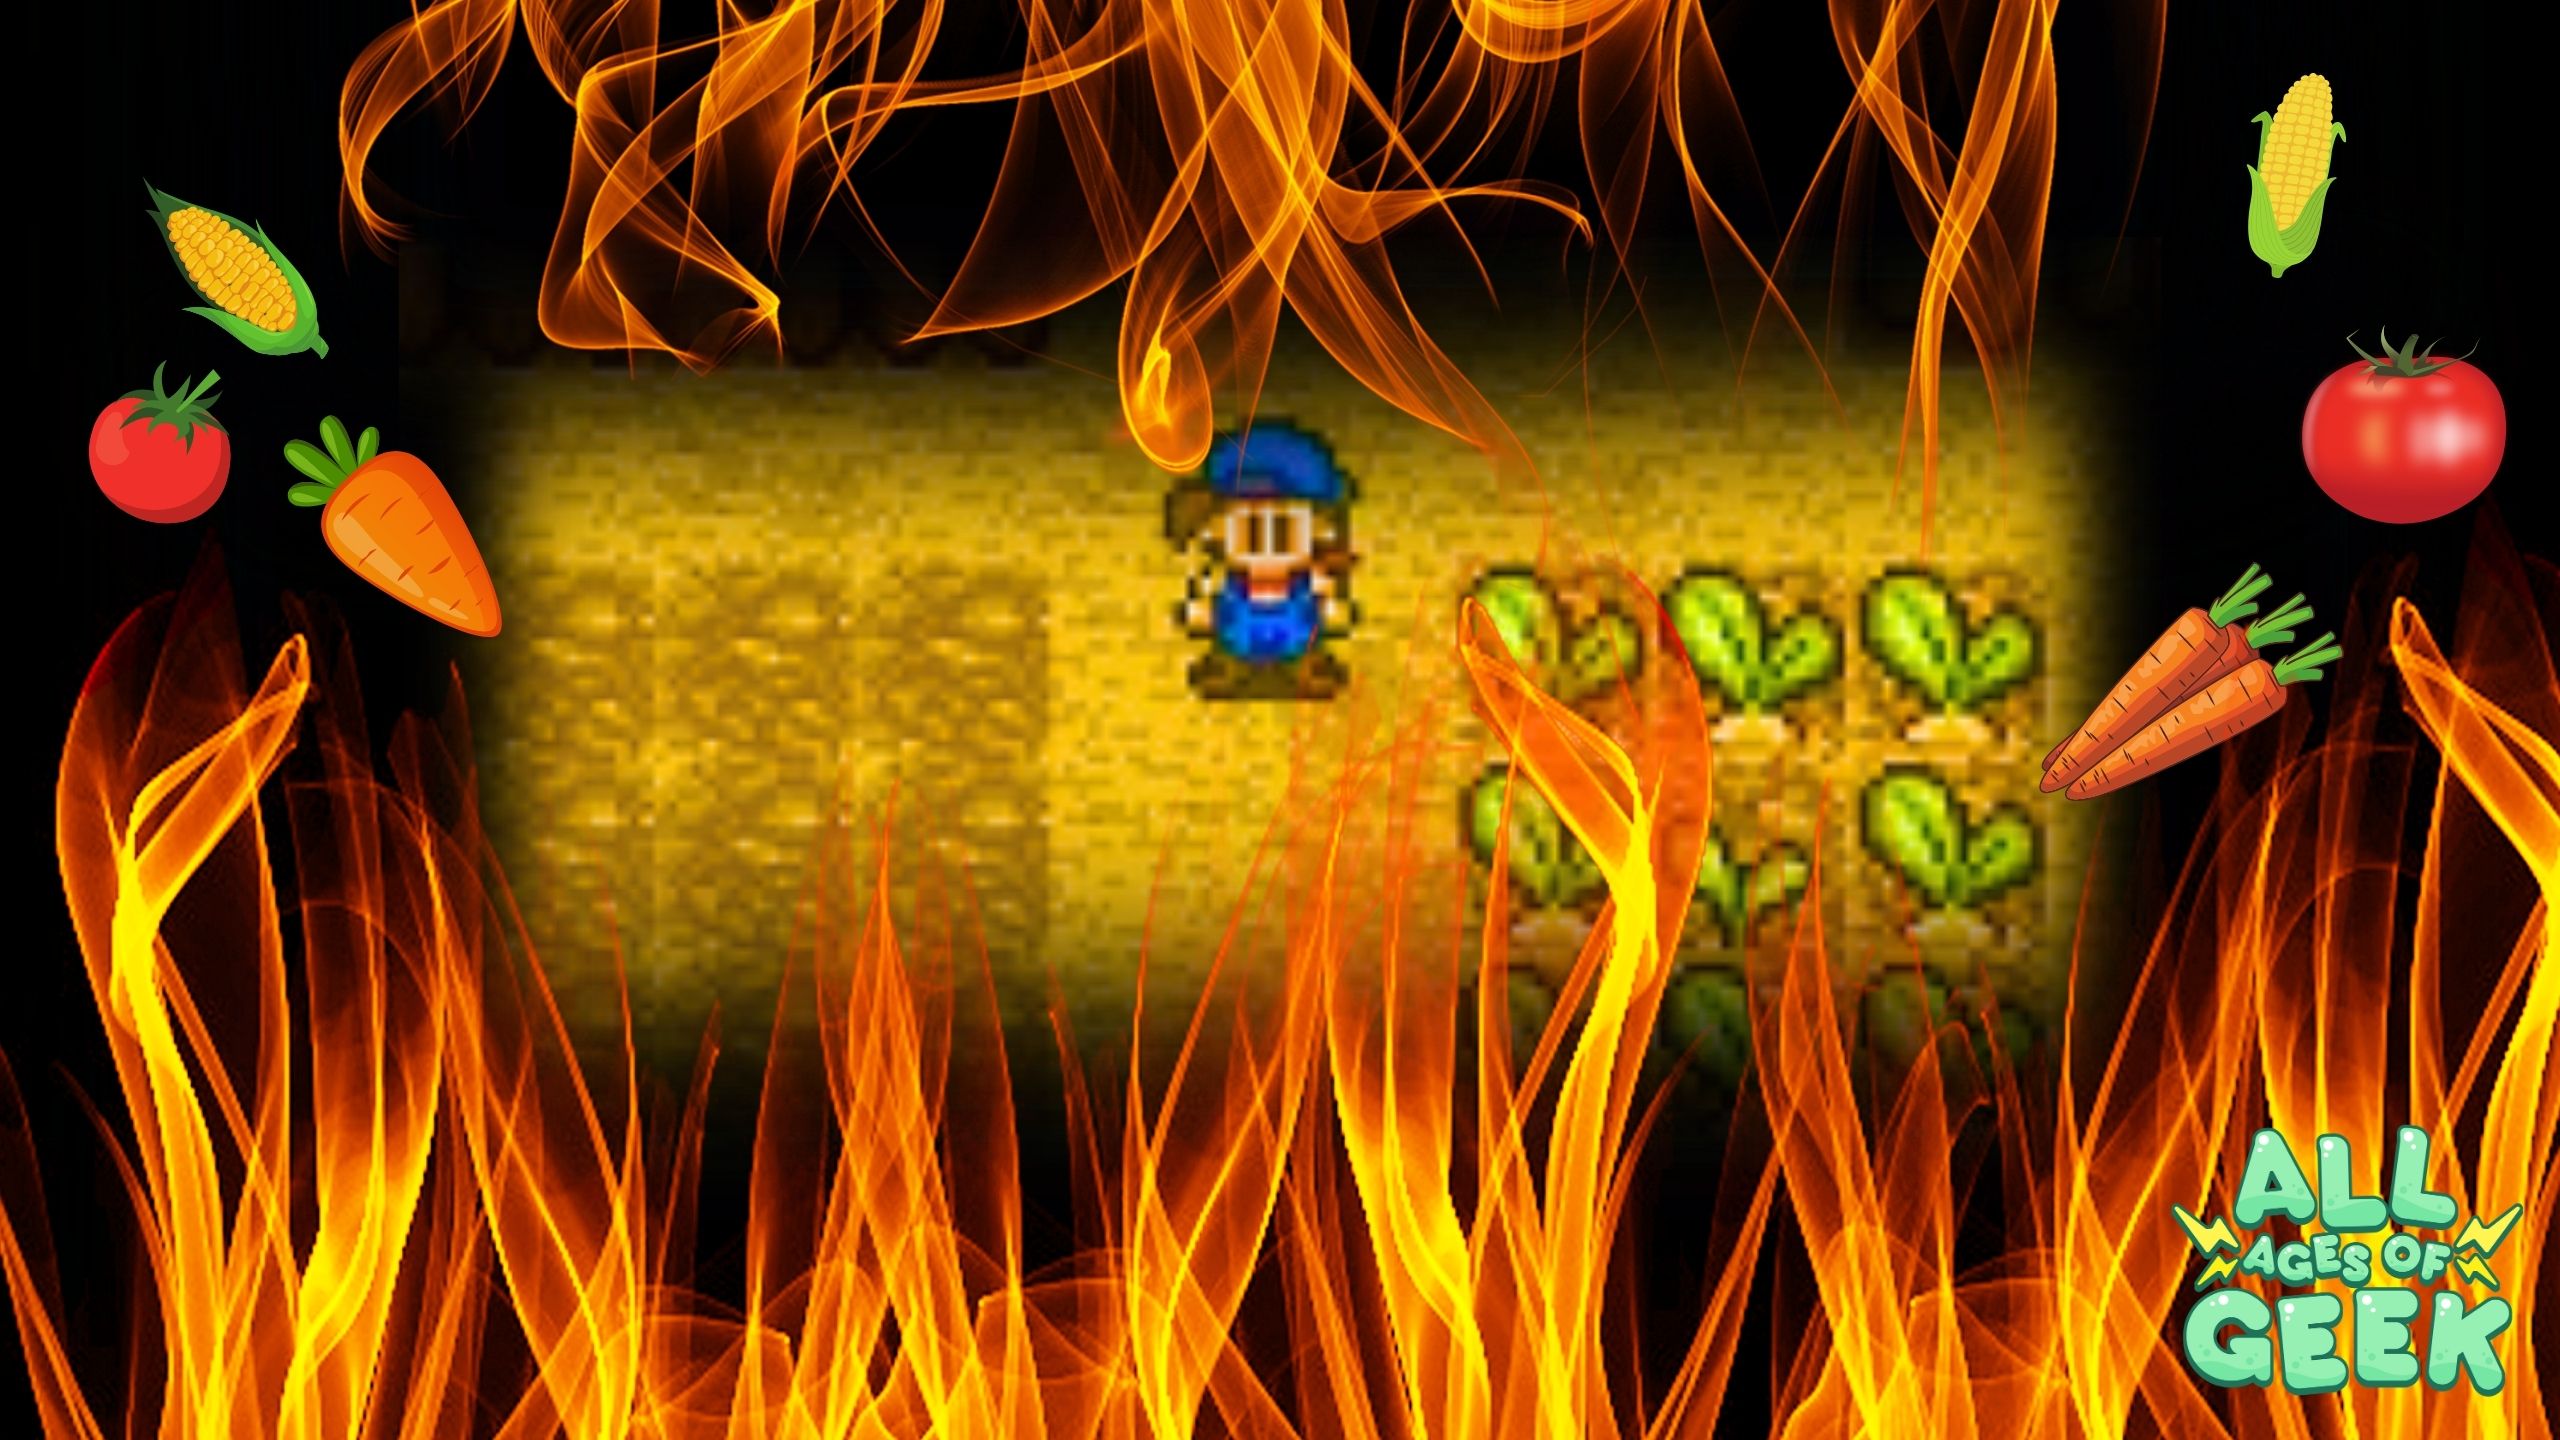 10 Eerie Aspects and Unsettling Secrets of the Original Harvest Moon